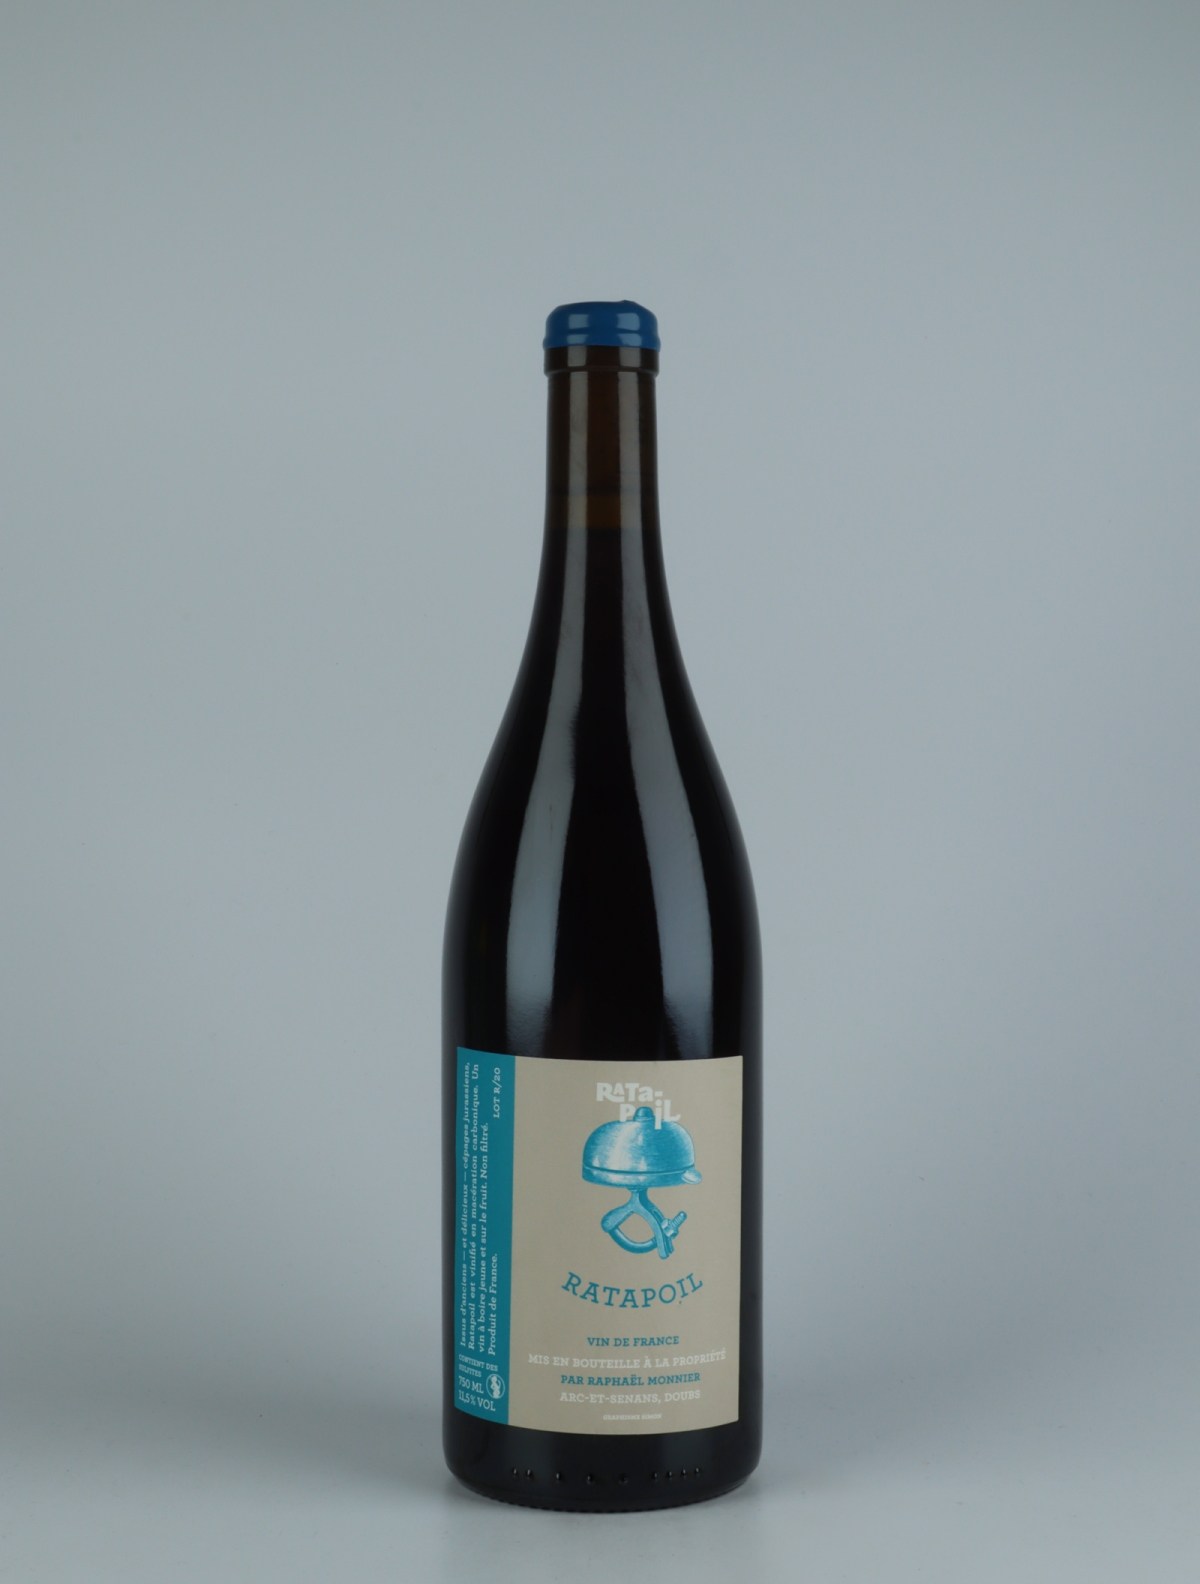 A bottle 2020 Ratapoil Rouge Red wine from Domaine Ratapoil, Jura in France